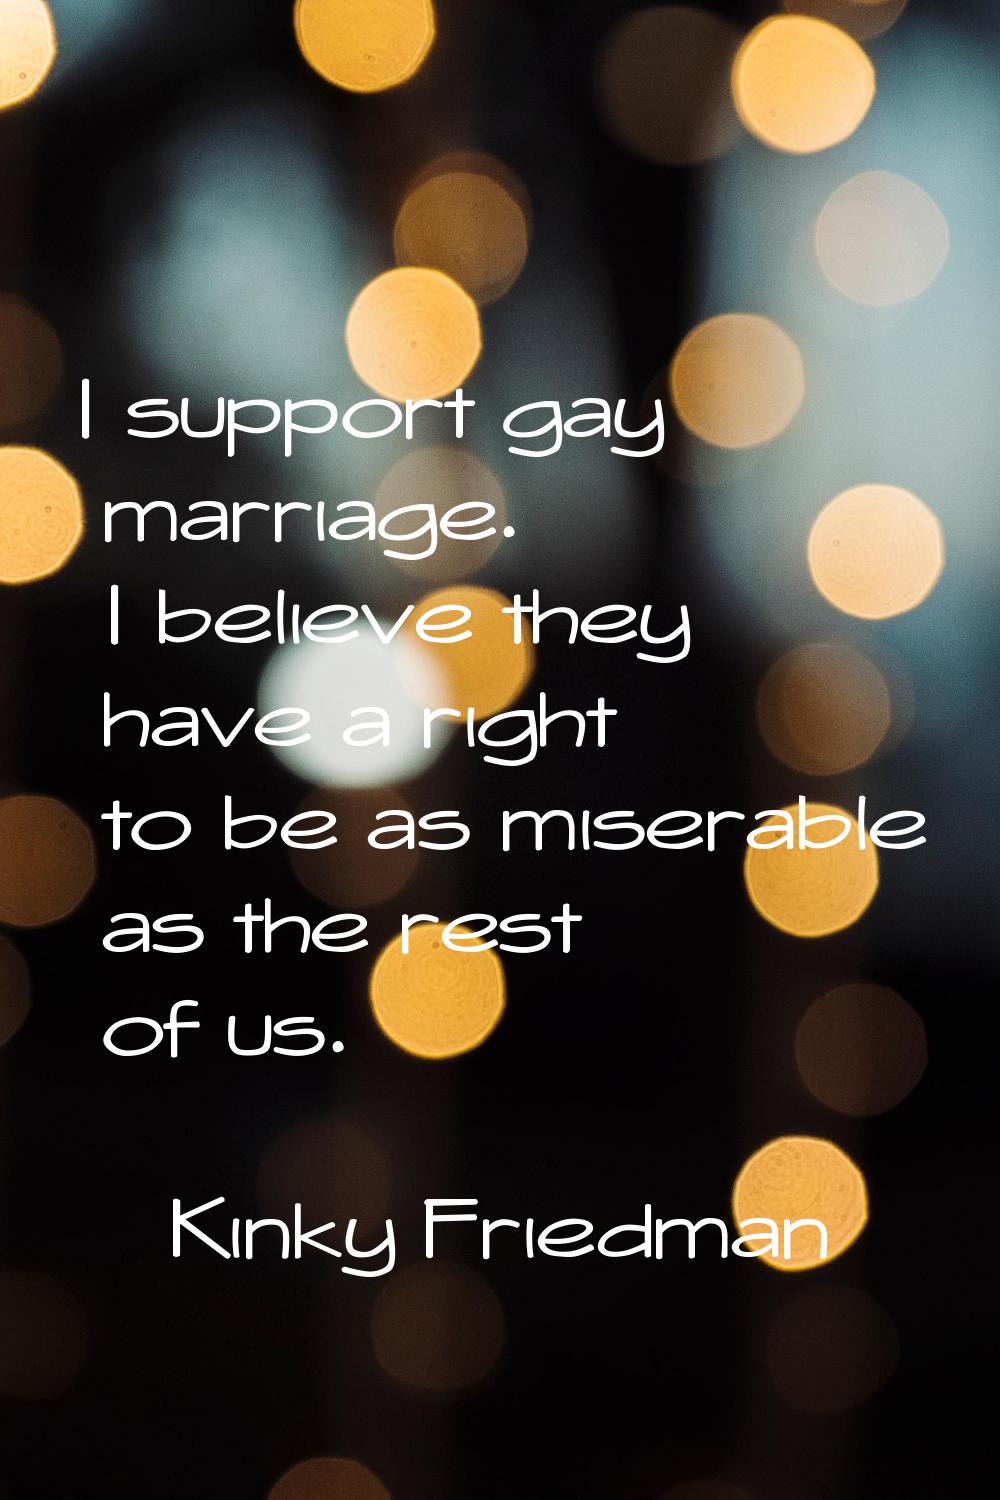 I support gay marriage. I believe they have a right to be as miserable as the rest of us.